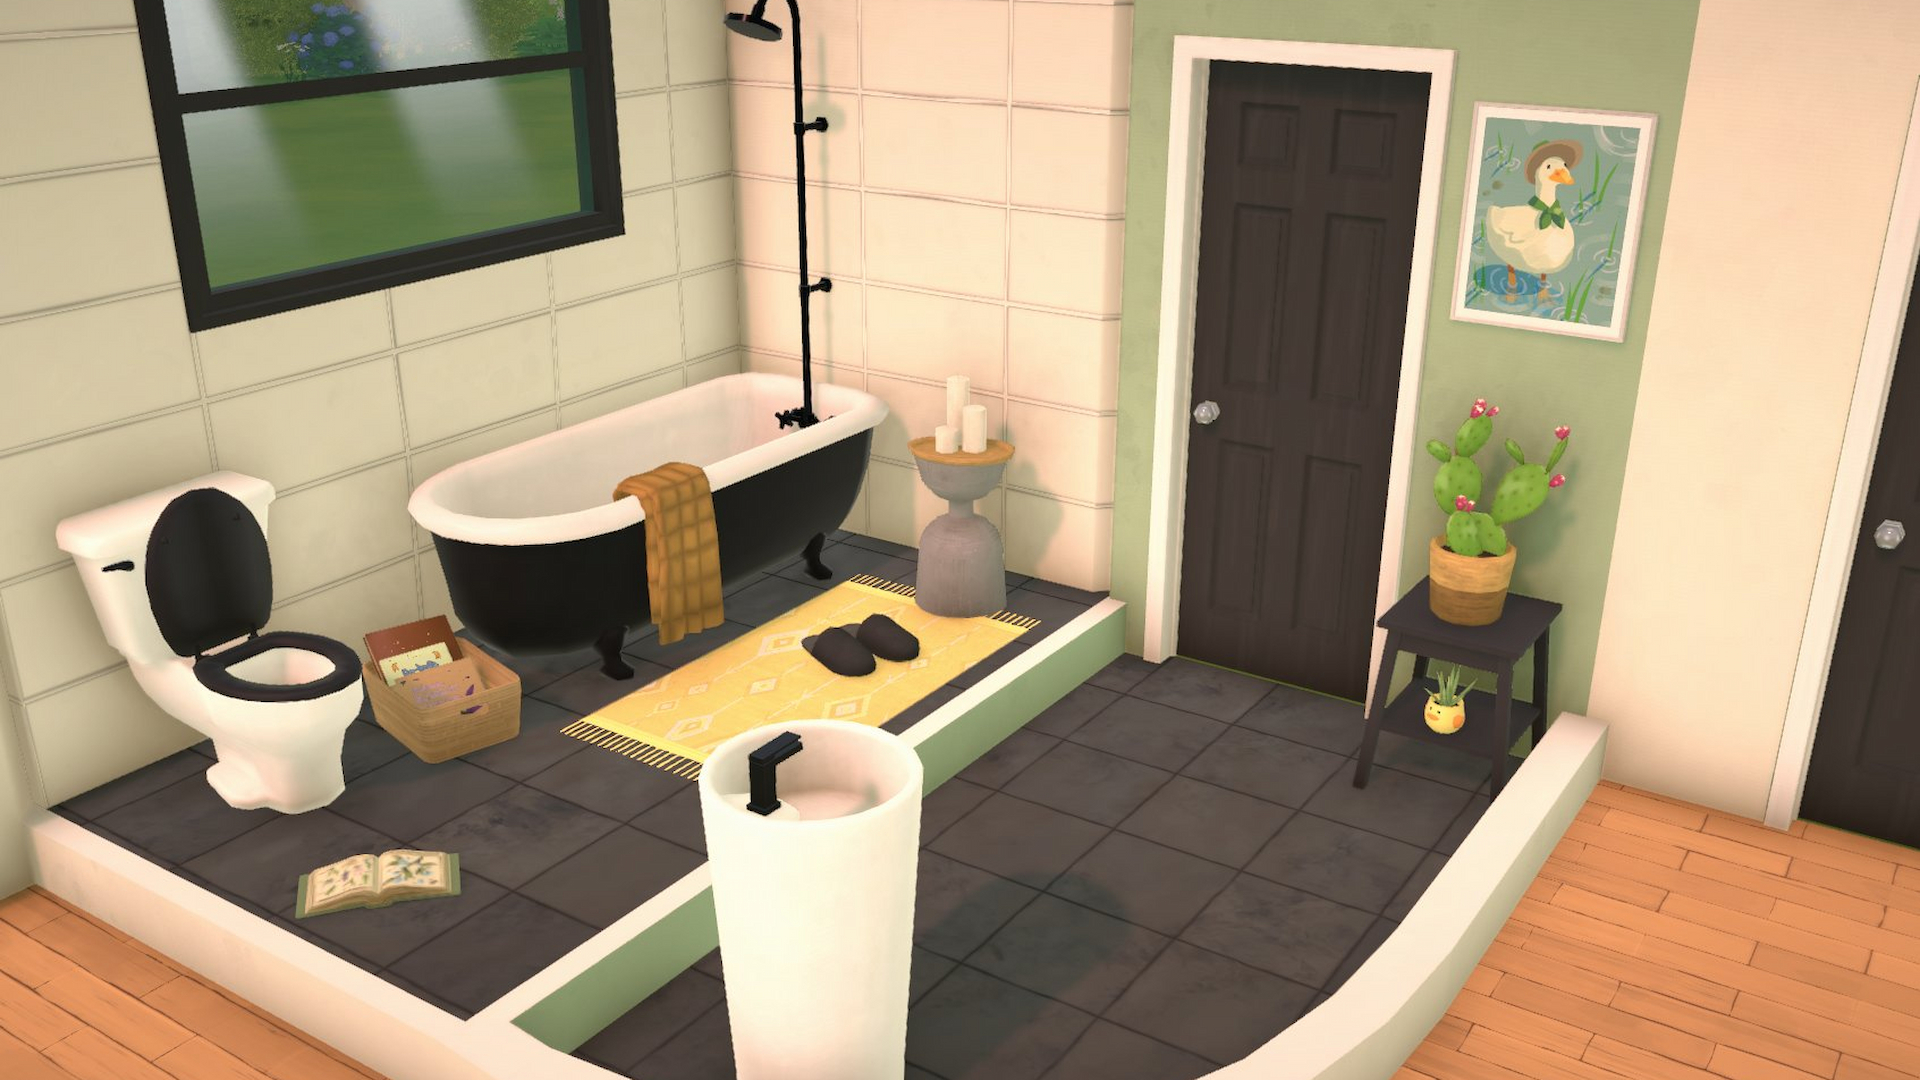 An image of a bathroom from Paralives, featuring a black door, black-tiled flooring, a black and white bathtub, a white sink with a black faucet, and a toilet